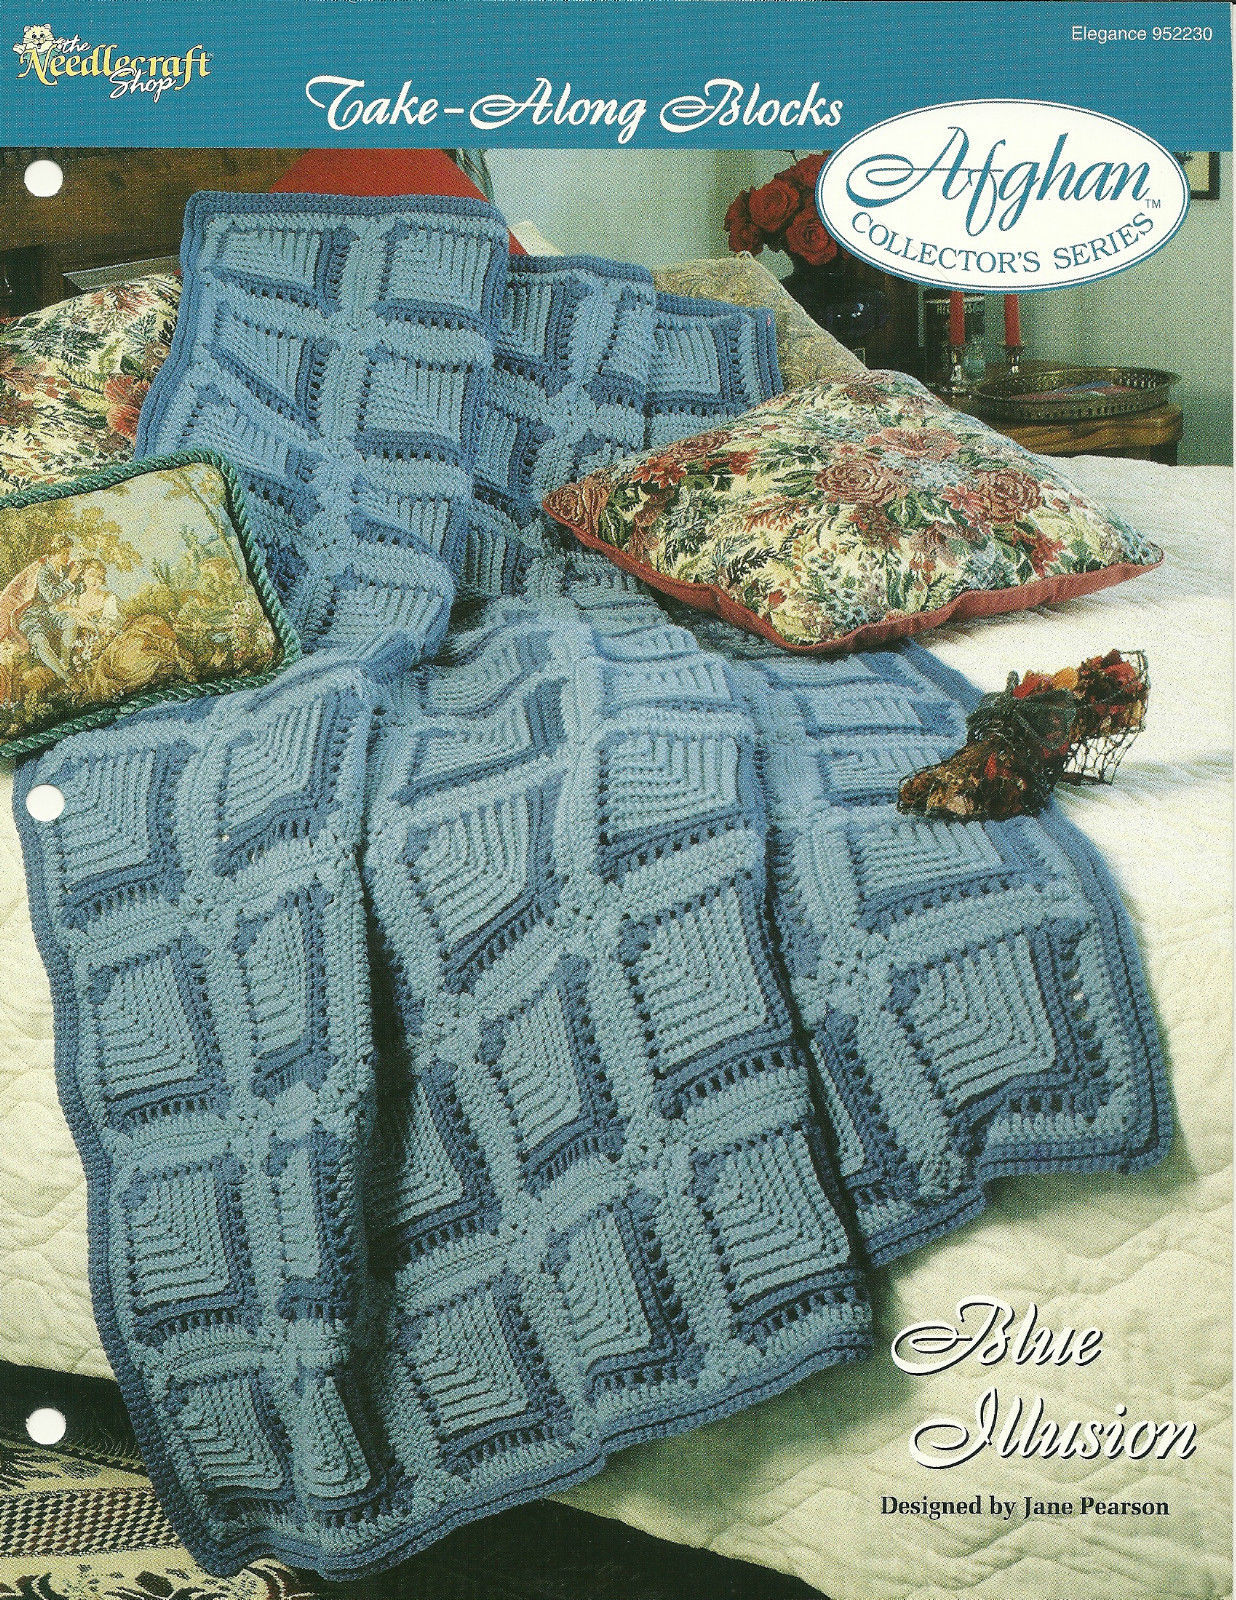 Primary image for Needlecraft Shop Crochet Pattern 952230 Blue Illusion Afghan Collectors Series